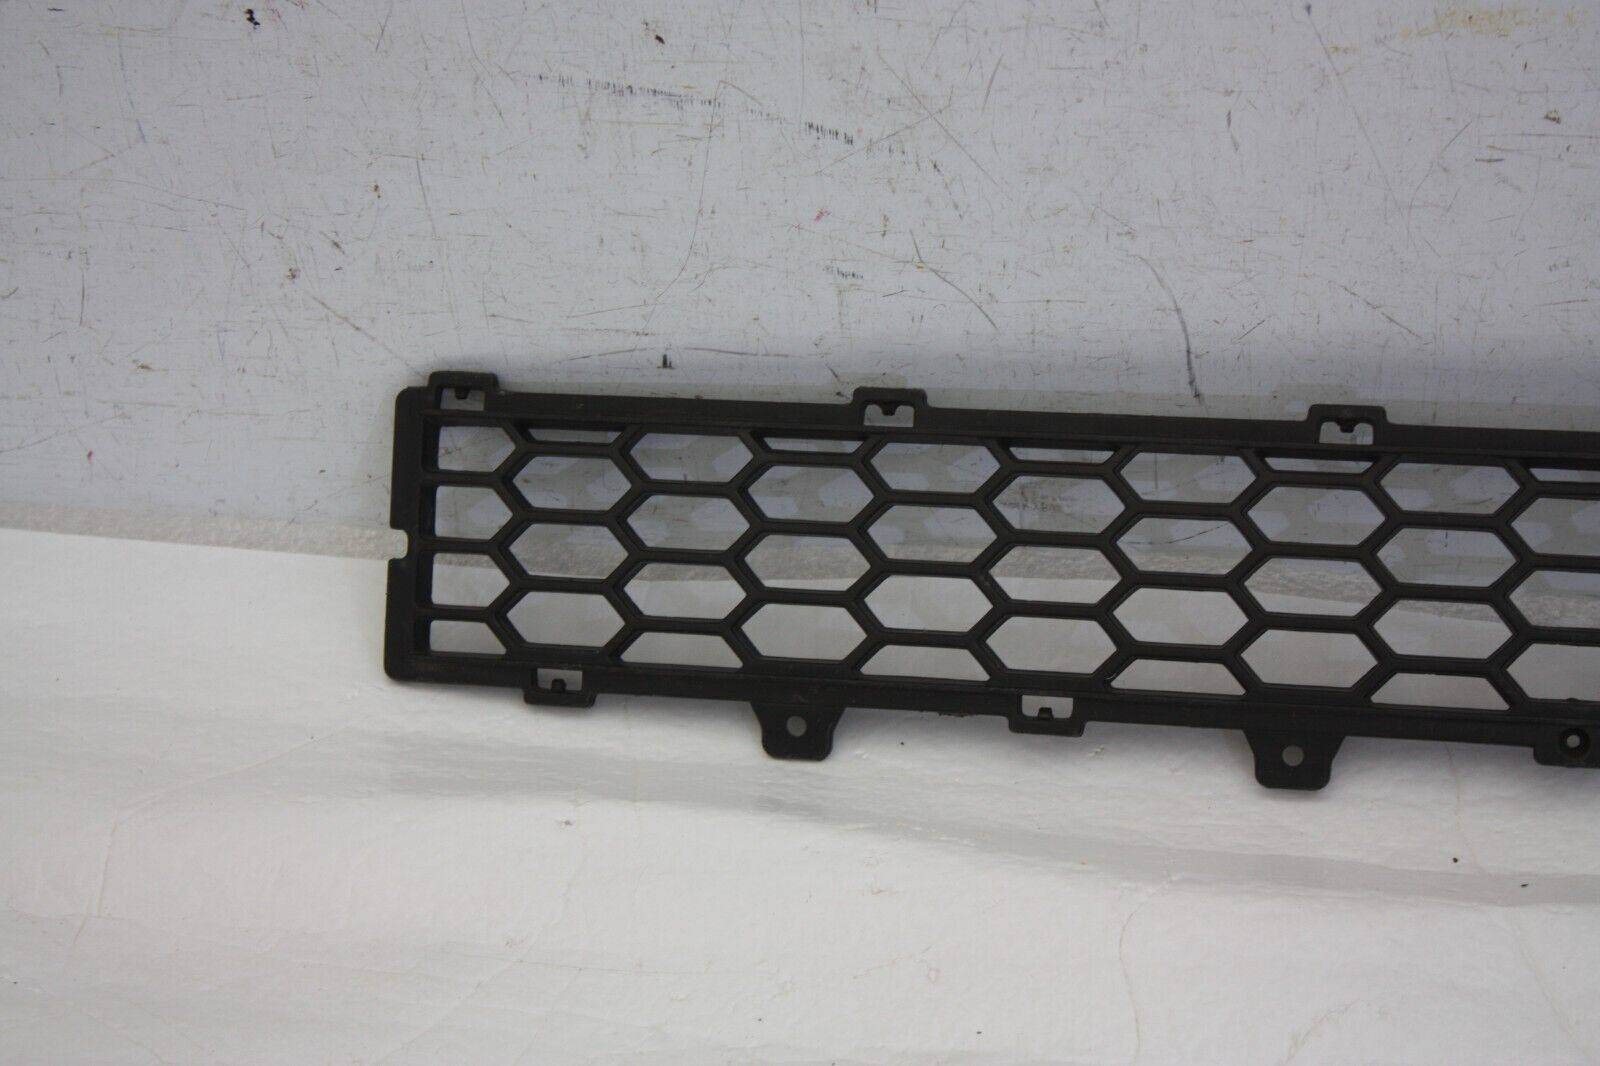 Chevrolet-Captiva-Front-Bumper-Lower-Grill-2006-to-2011-96623441-Genuine-176268252421-4